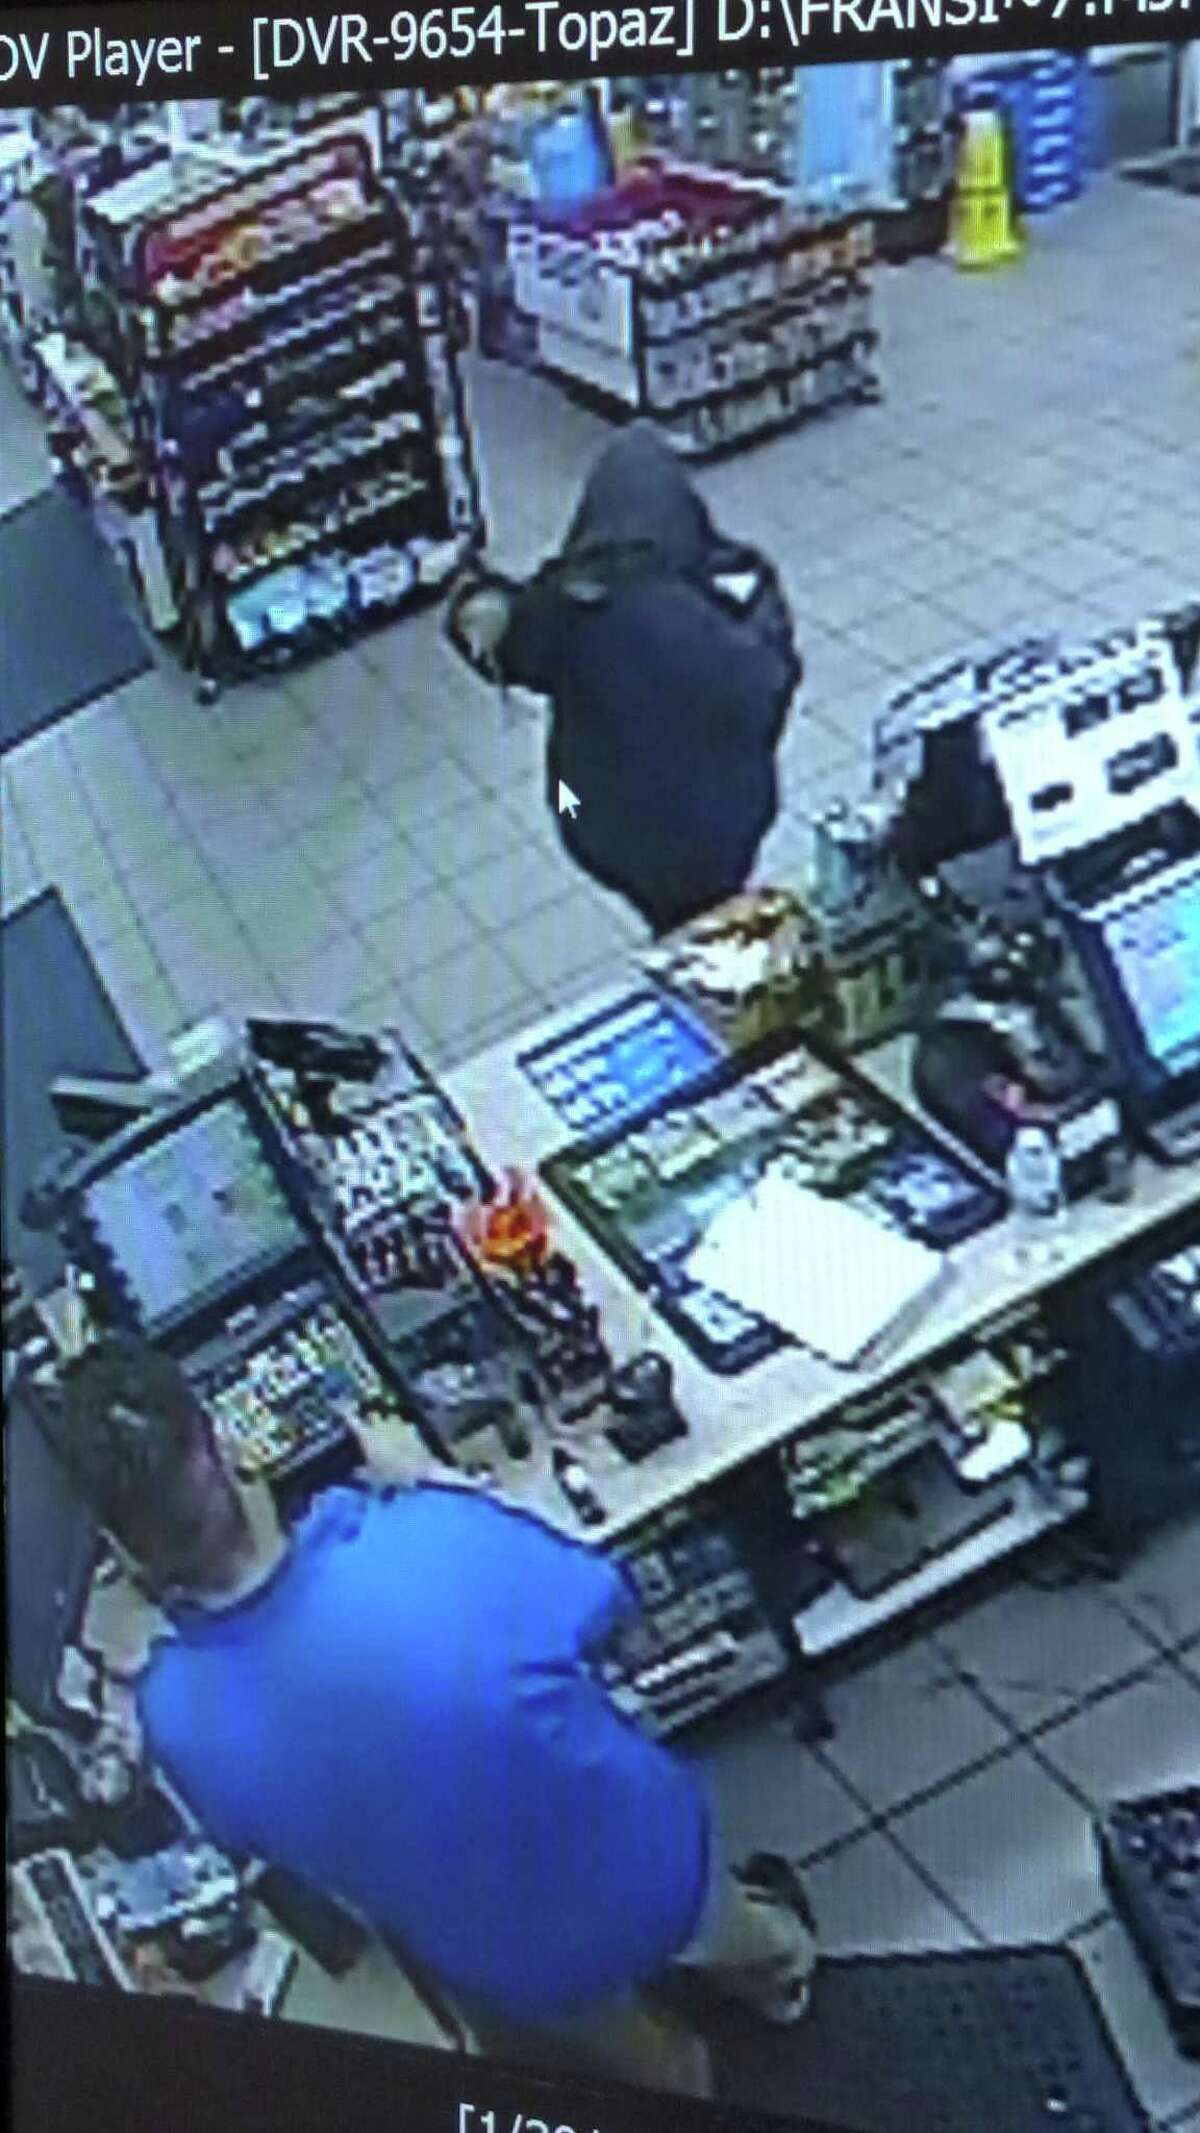 Laredo police said they are looking for the man in dark. He allegedly used a crow bar to threaten the convenience store employee.